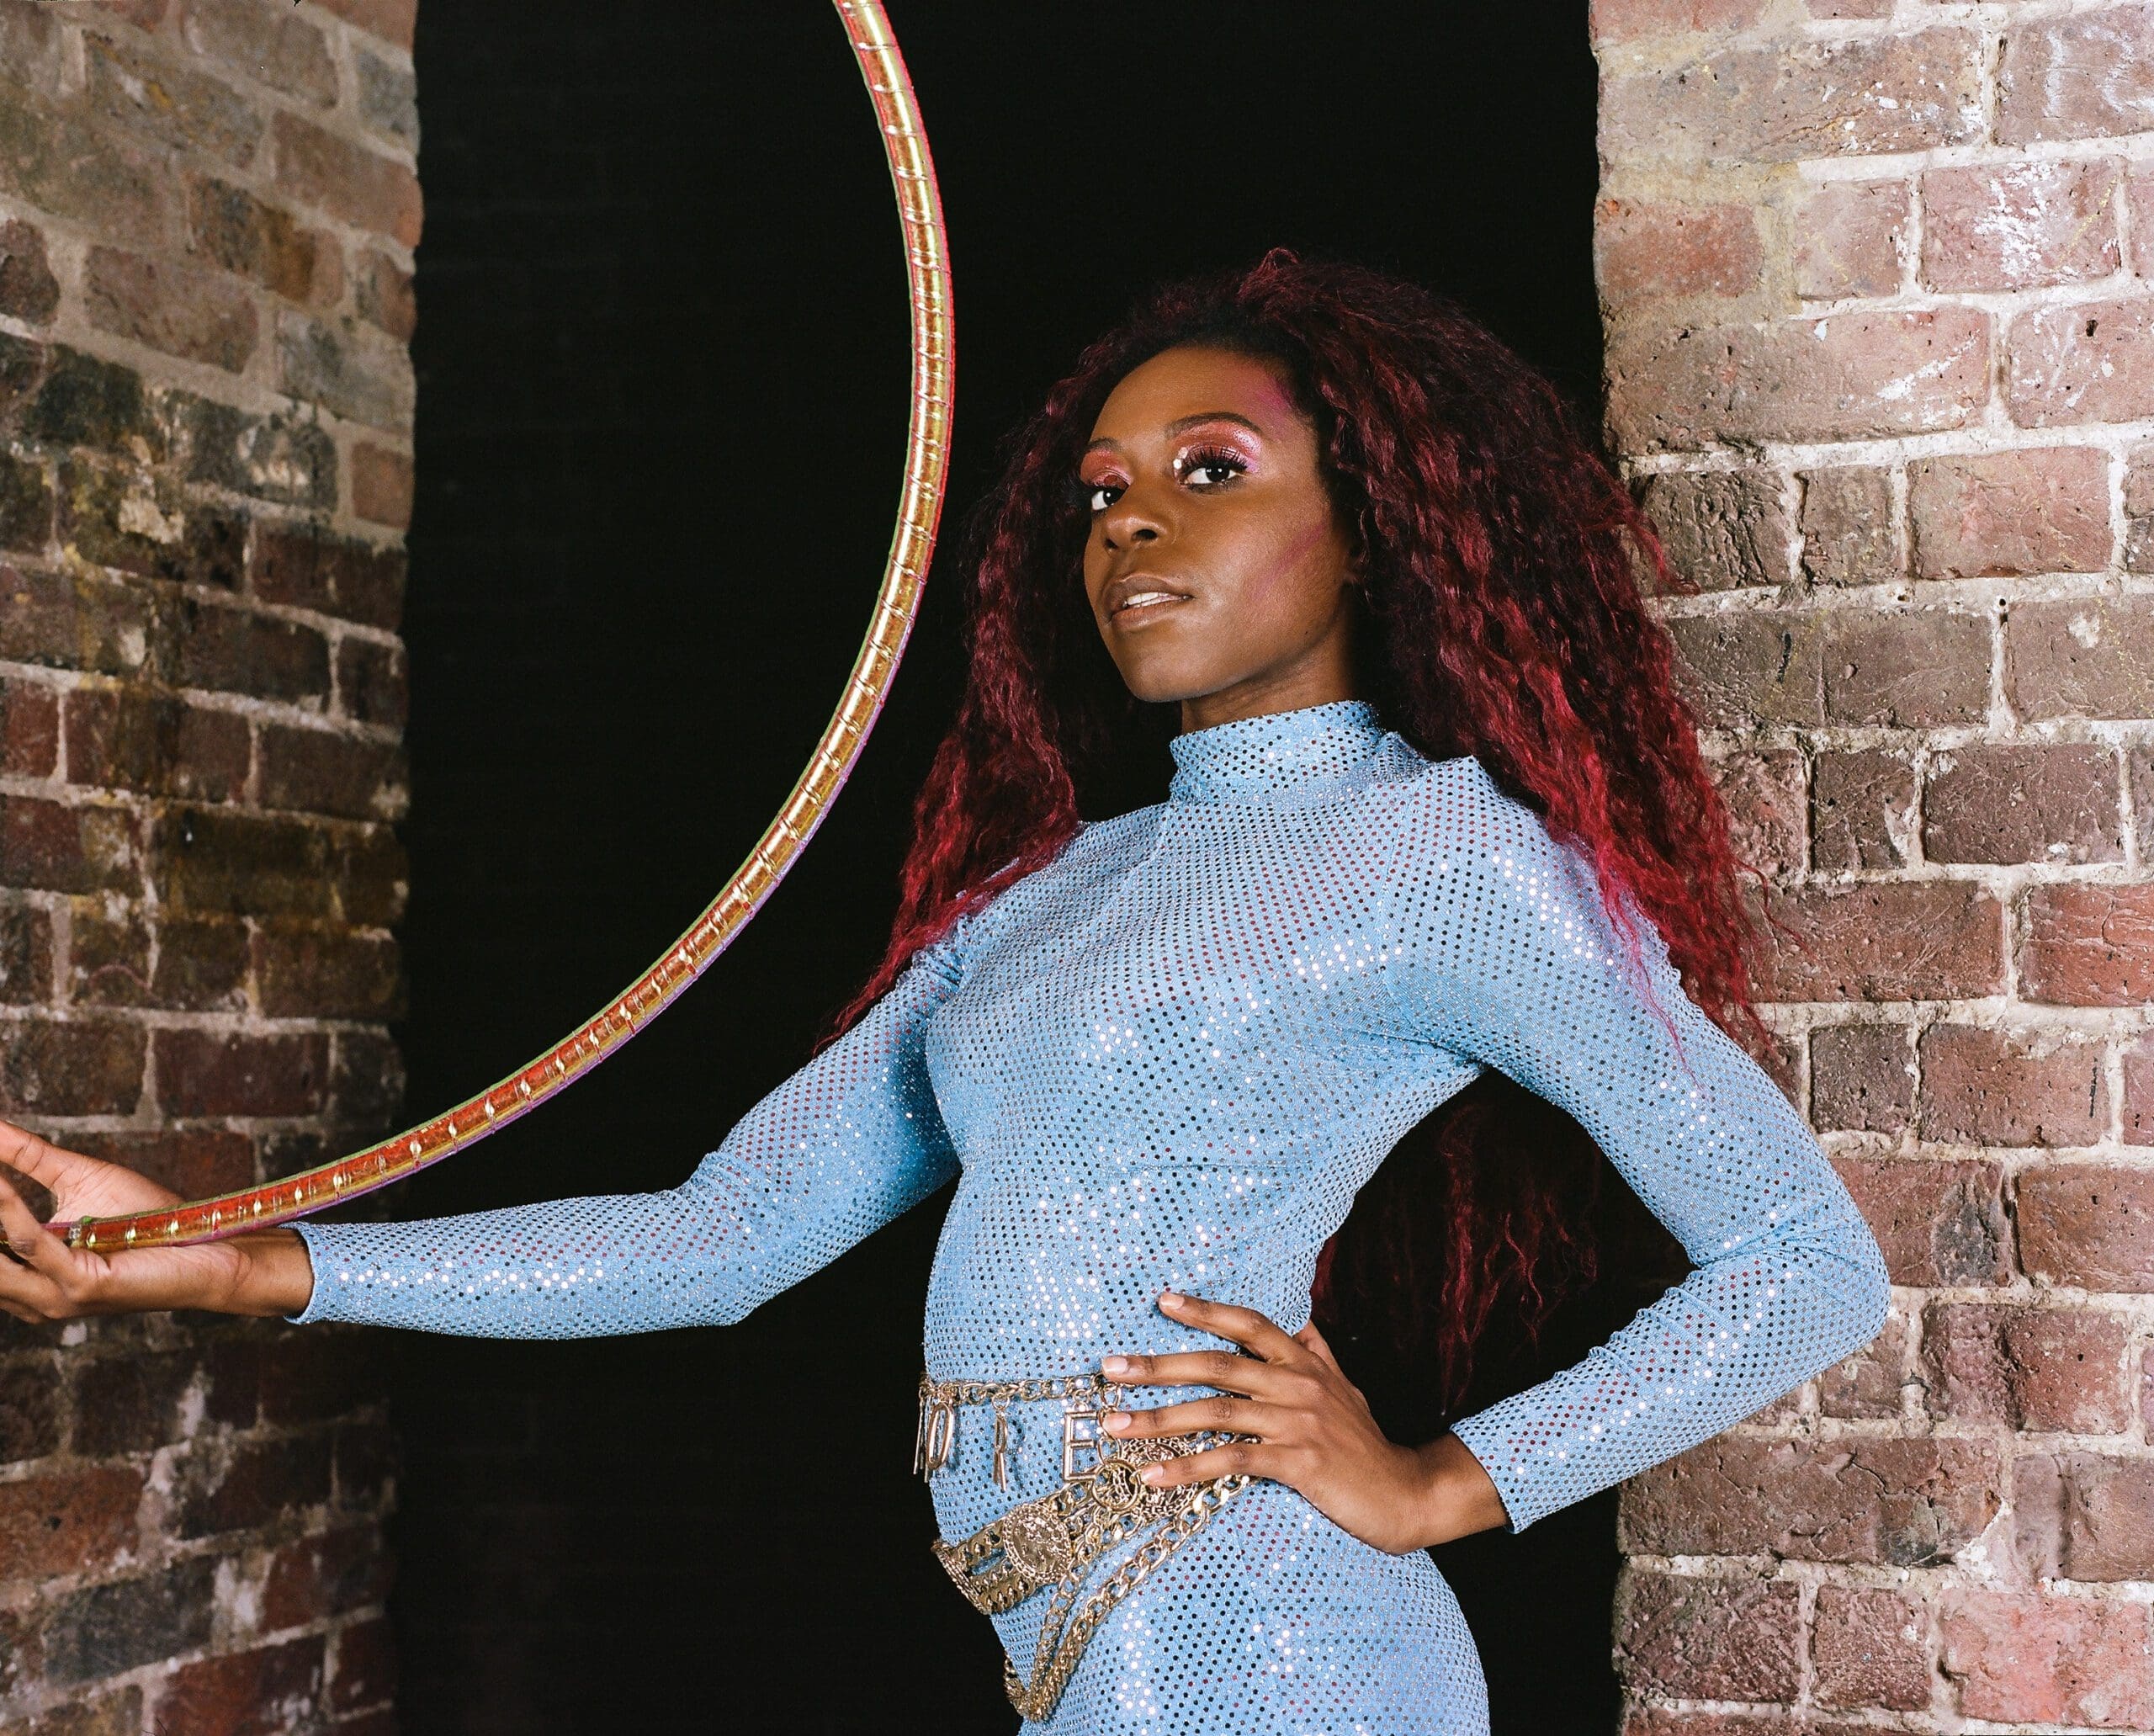 A black woman stands in front of a brick wall in a sparkly blue bodysuit holding a hula hoop